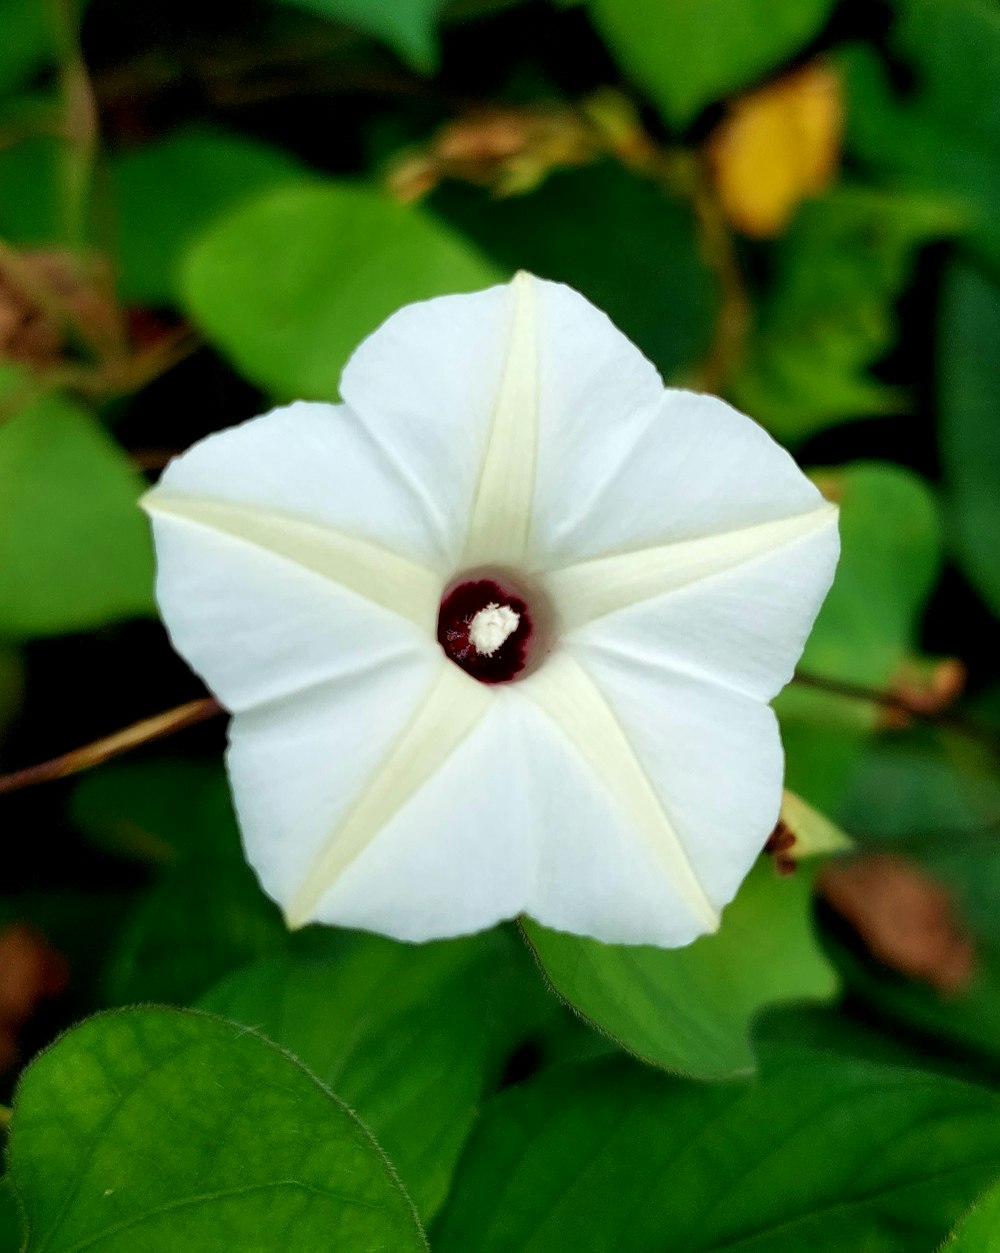 a white flower with a red center